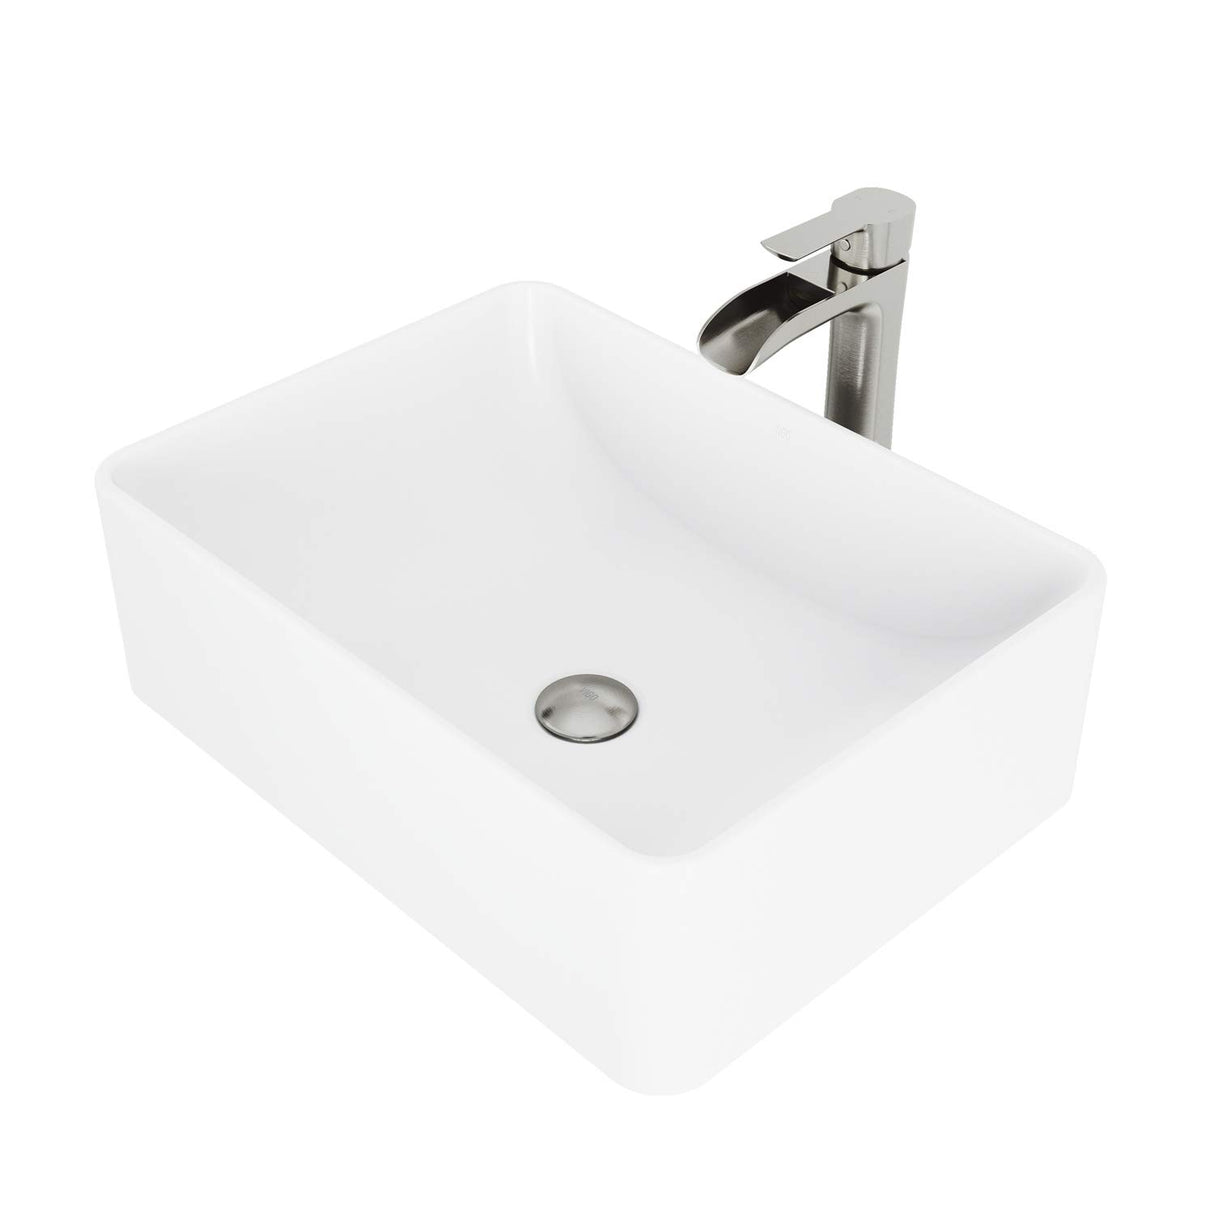 VIGO VGT1088BN 14.38" L -19.75" W -10.5" H Handmade Matte Stone Rectangle Vessel Bathroom Sink Set in Matte White Finish with Brushed Nickel Single-Handle Waterfall Faucet and Pop Up Drain